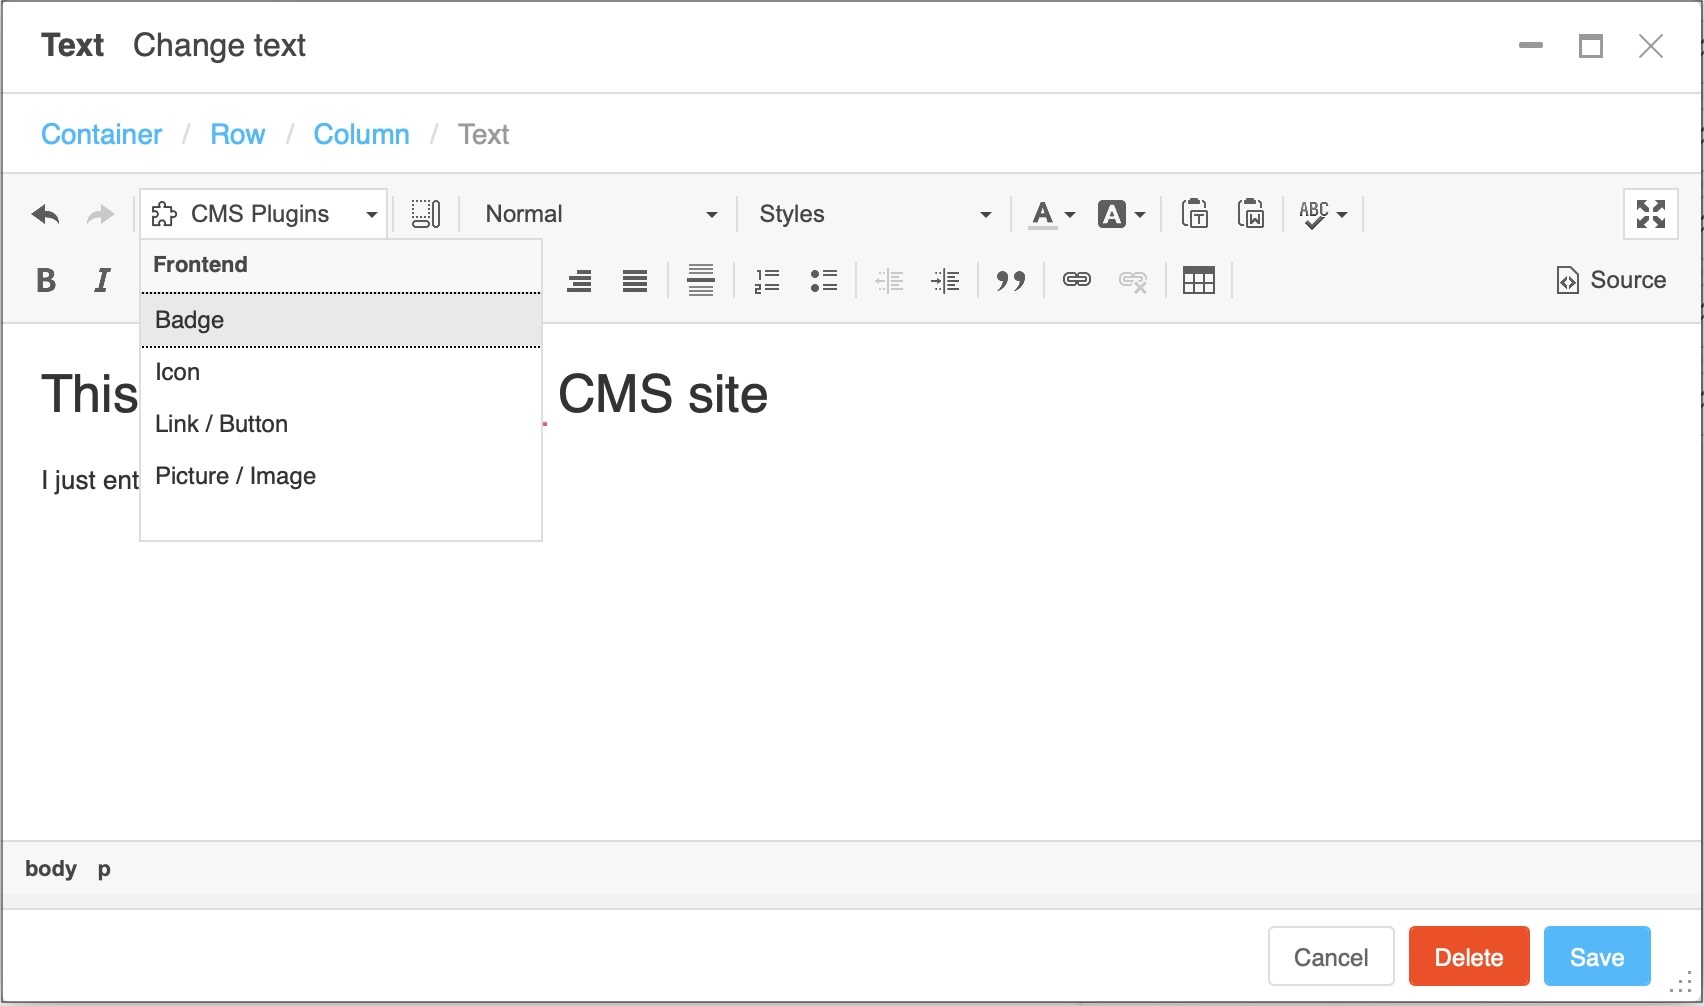 The CMS Plugins menu in the rich text editor